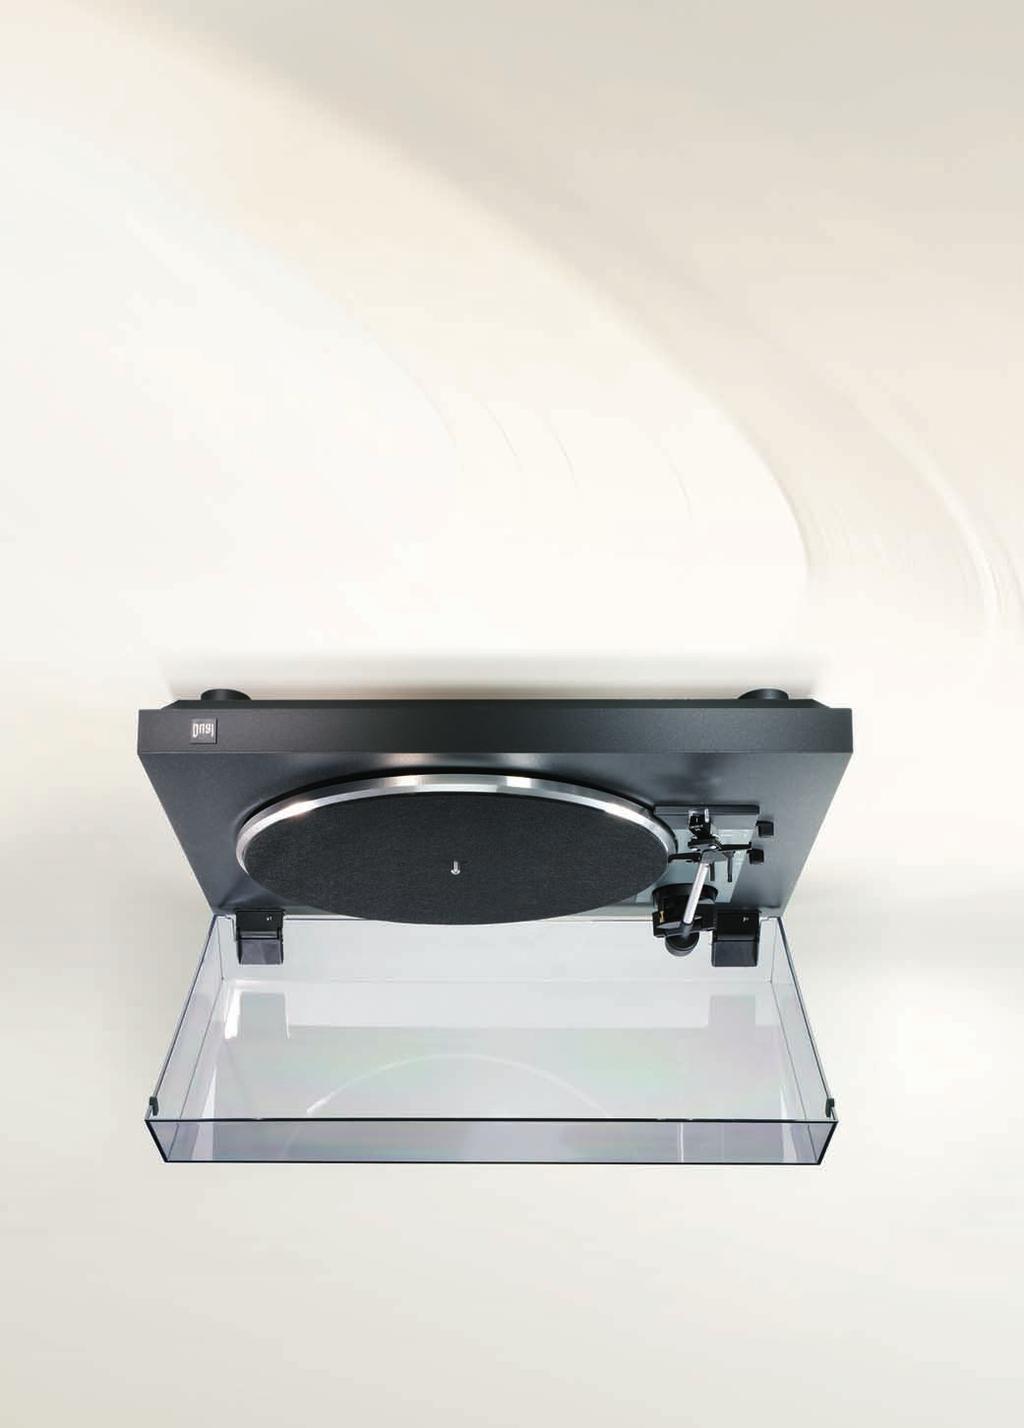 CS 415-2 / CS 415-2 EV * Colour: Black Fully-Automatic Turntable with mature technology and first-class workmanship. The perfect start into the DUAL tradition, 100% MADE IN GERMANY.